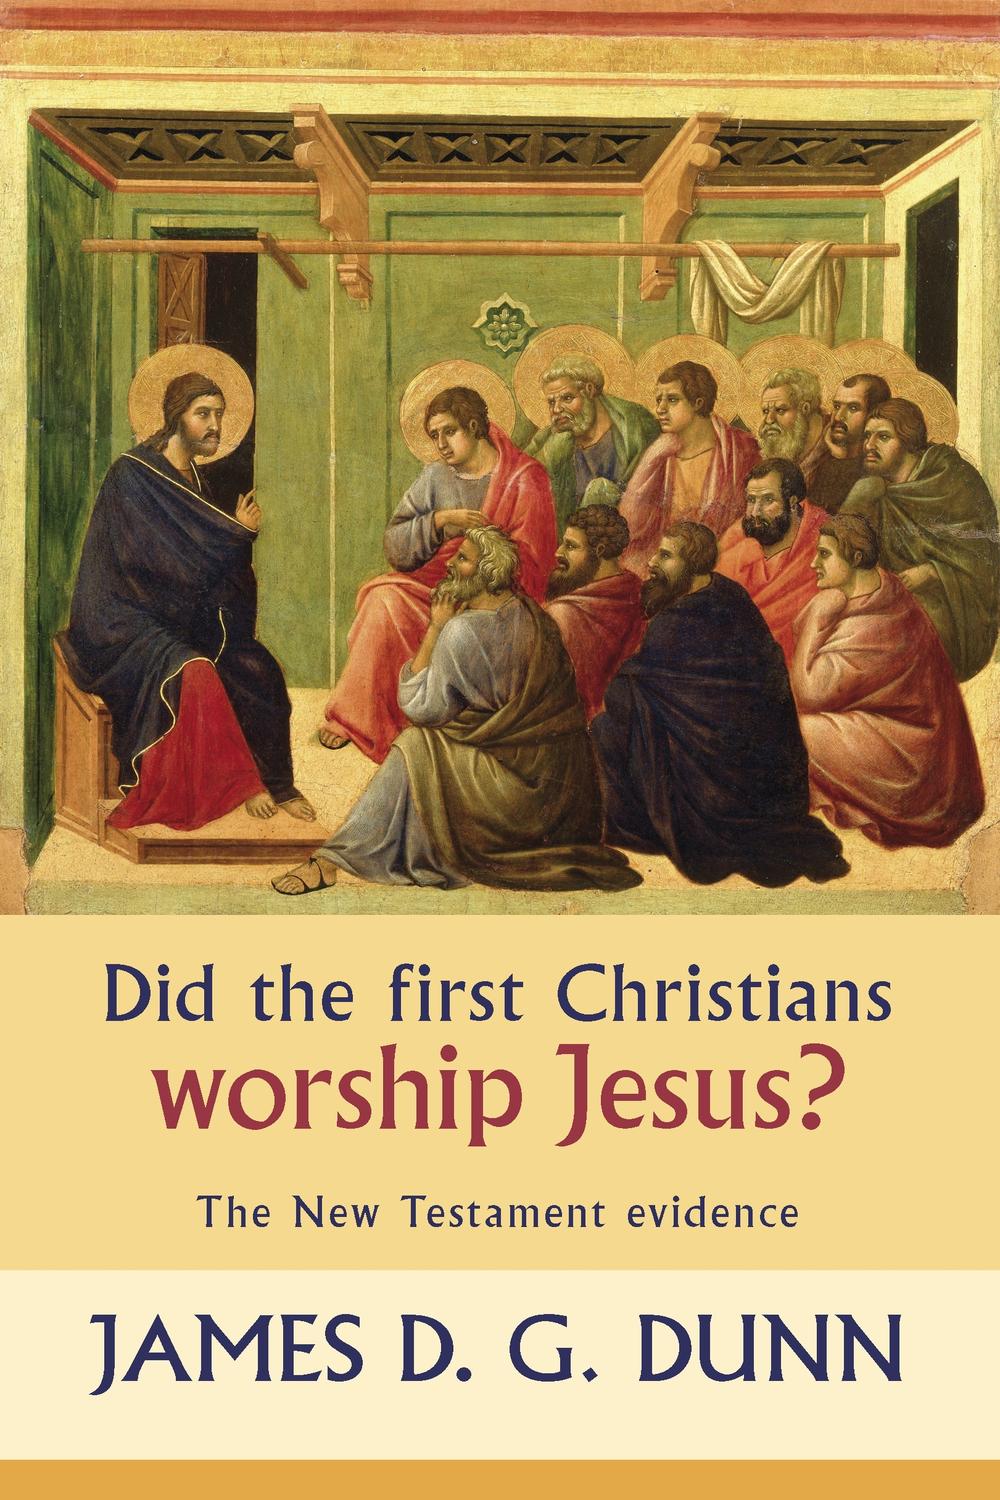 Did the First Christians Worship Jesus? - James D. G. Dunn